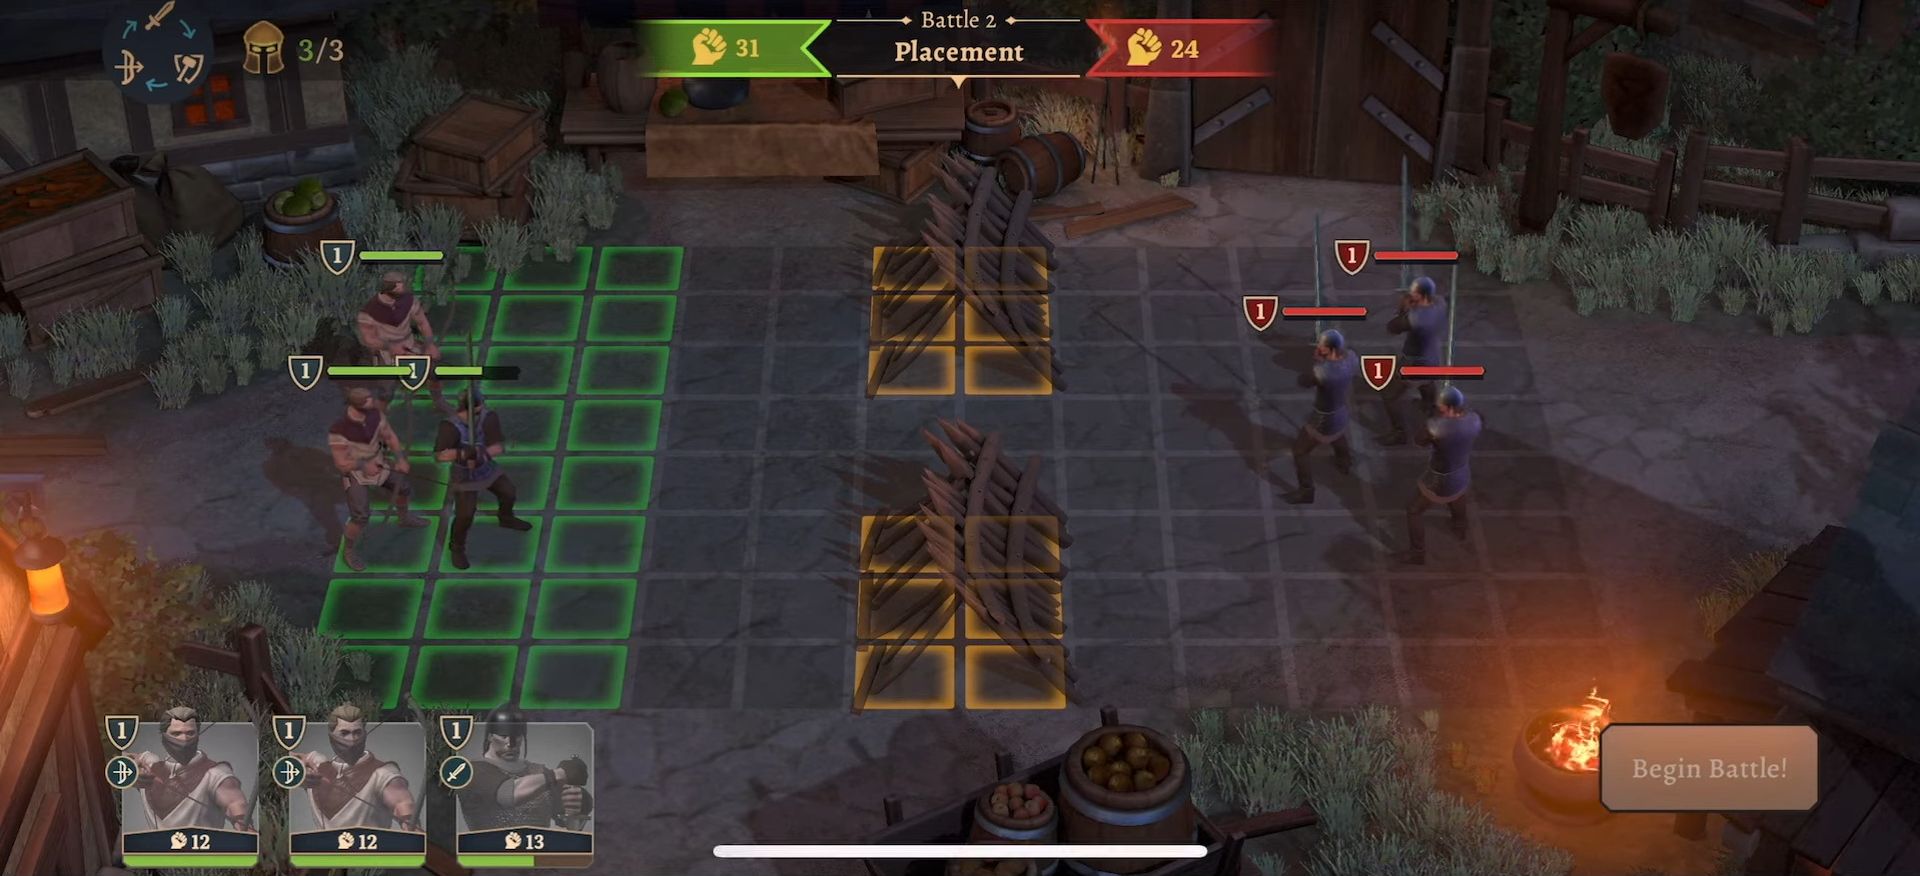 Gameplay of the Battlesmiths: Blade & Forge for Android phone or tablet.